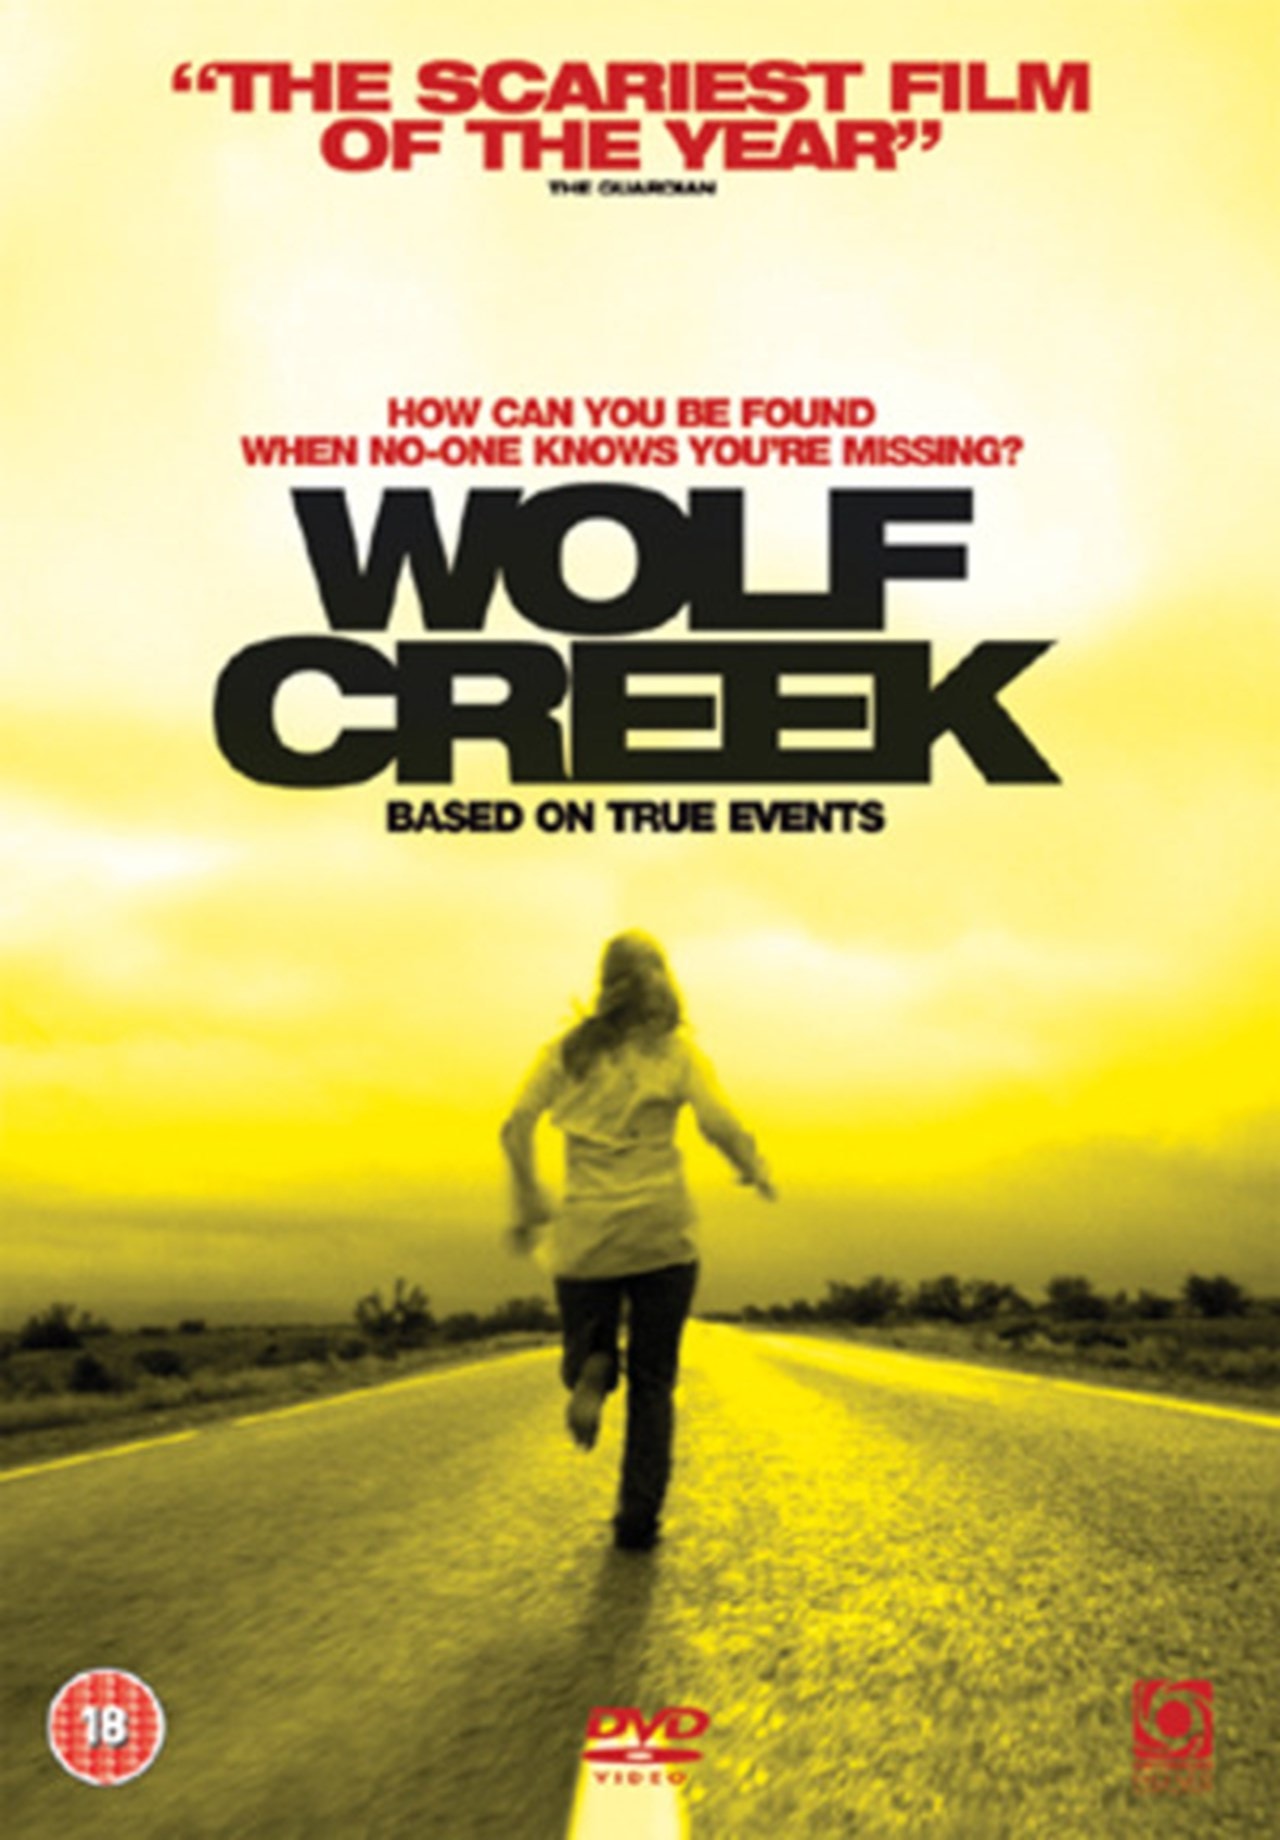 Wolf Creek | DVD | Free shipping over £20 | HMV Store